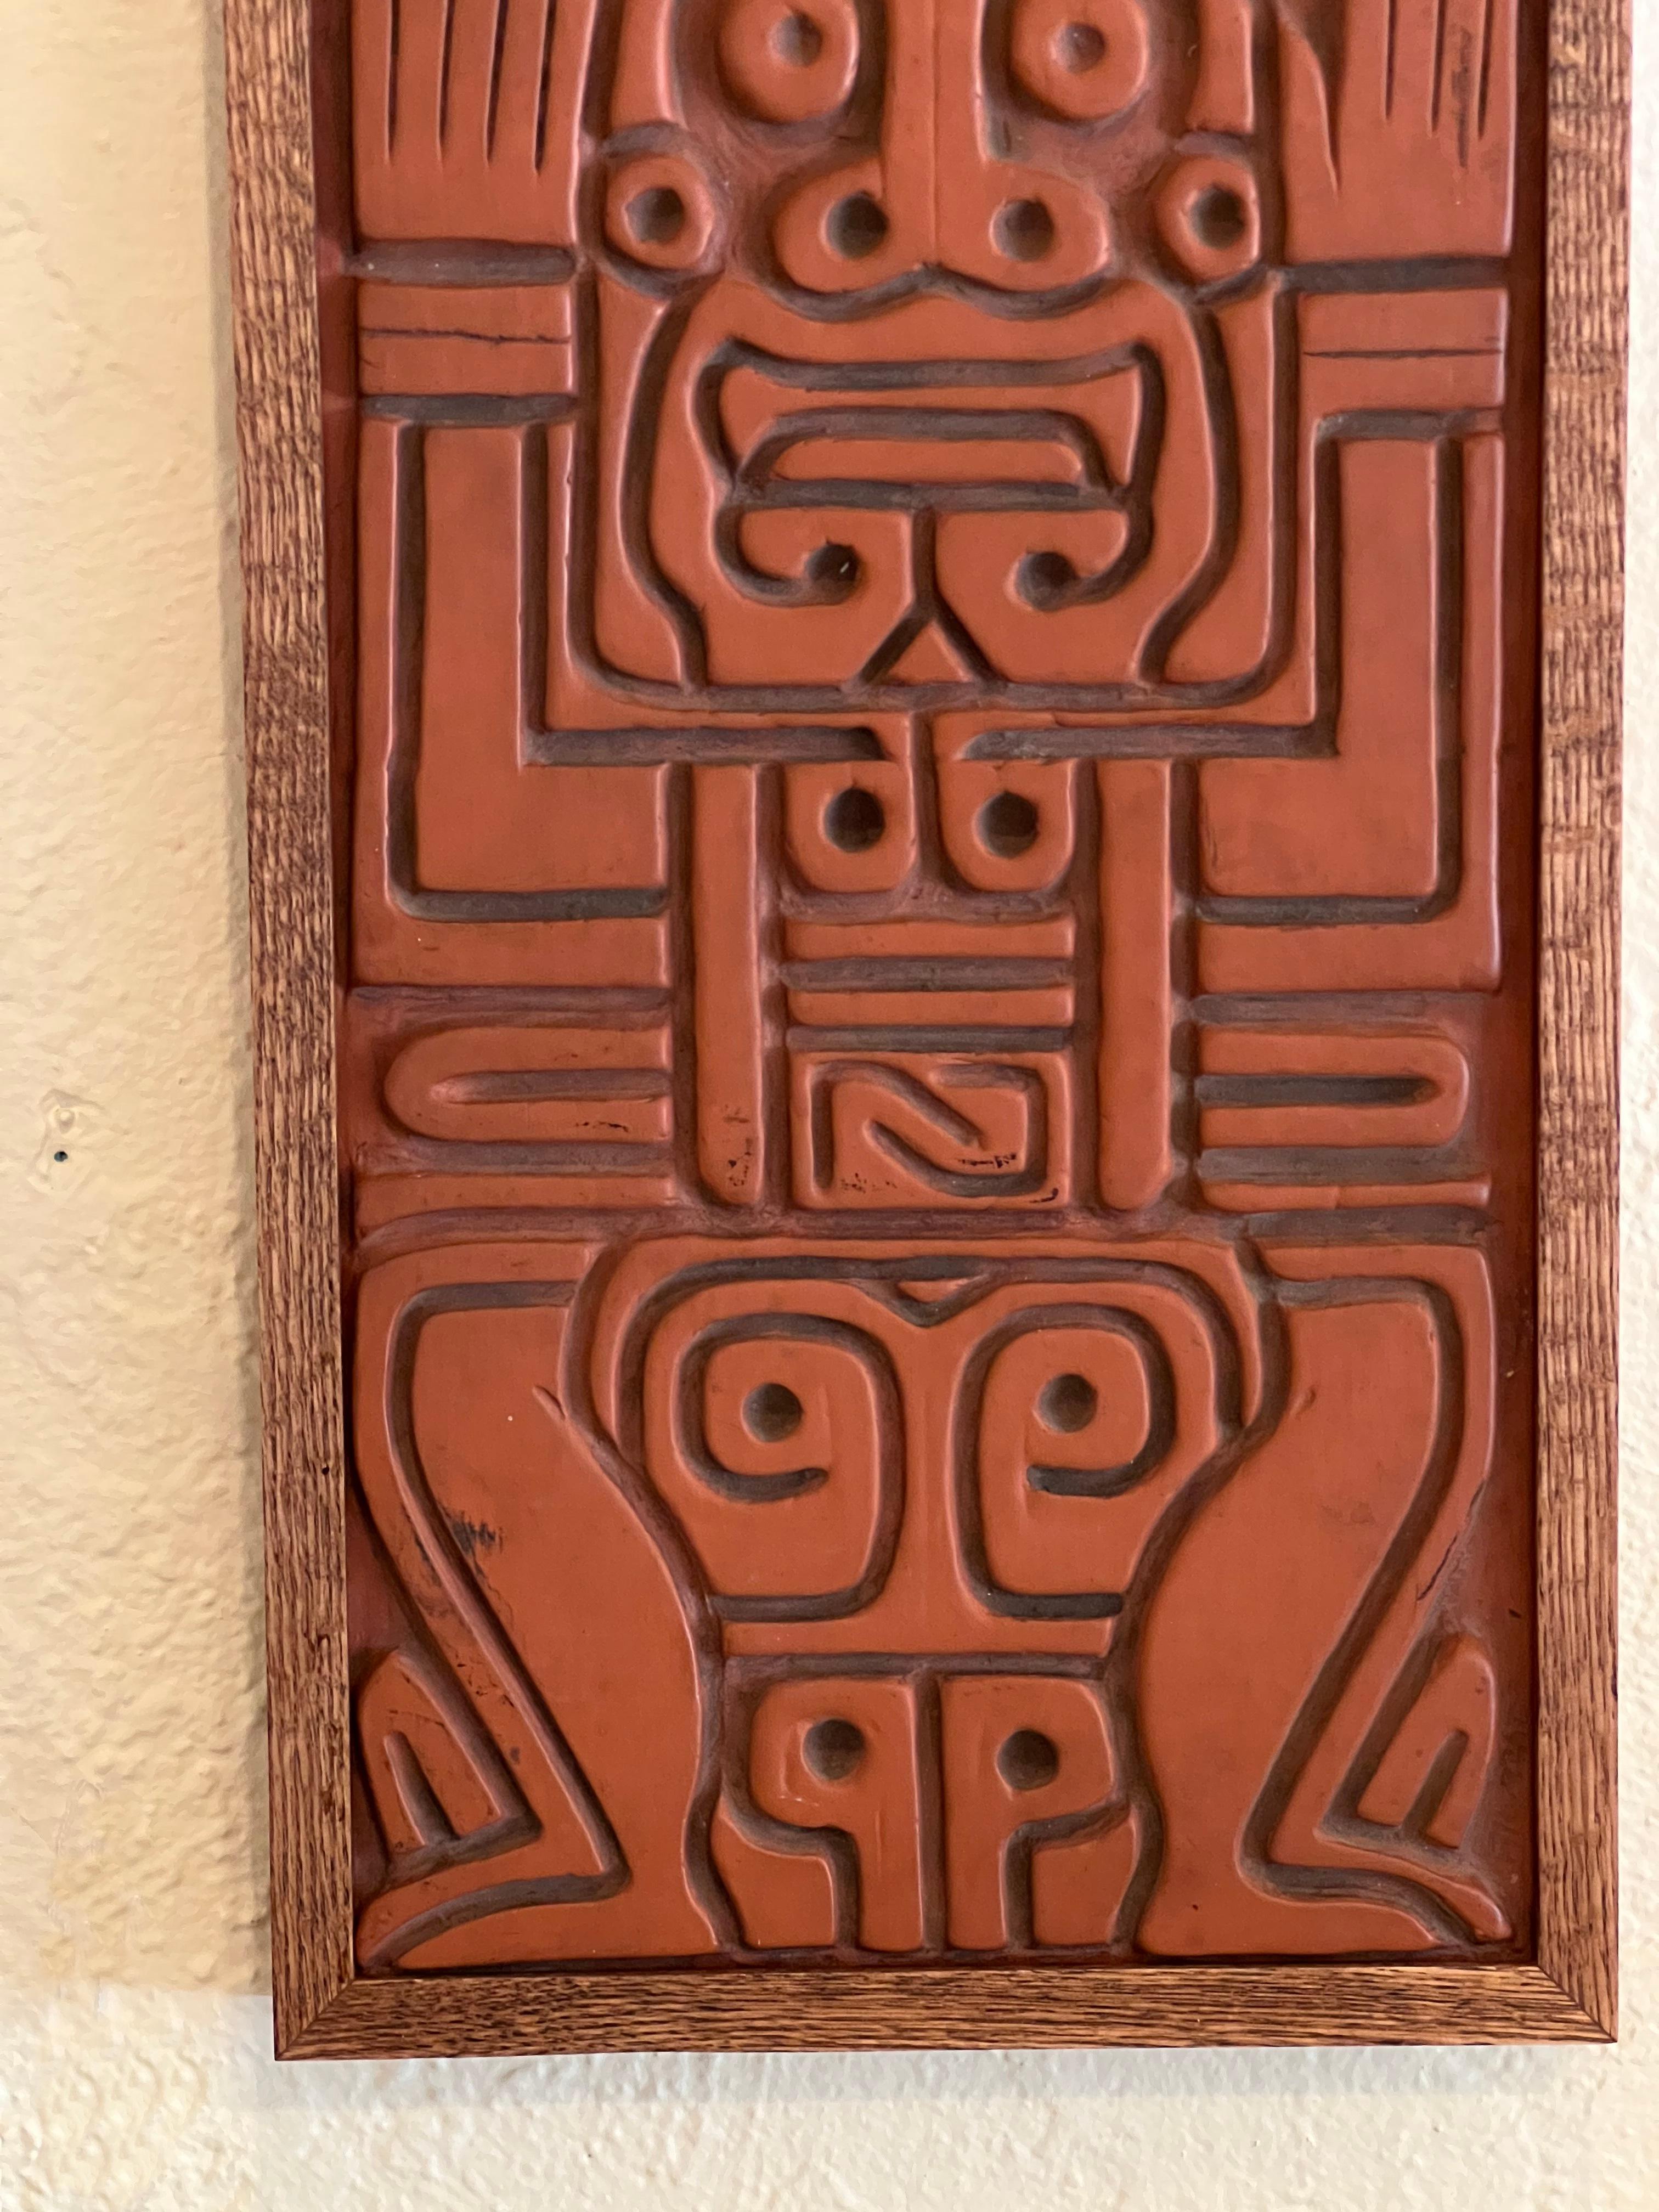 This wall sculpture by Albrecht is a three-dimensional piece with a Mayan design that appeals to the sense of touch. It is made of molded terracotta, hand-finished with a polished surface. The artwork is also framed in oak, giving it a finished and